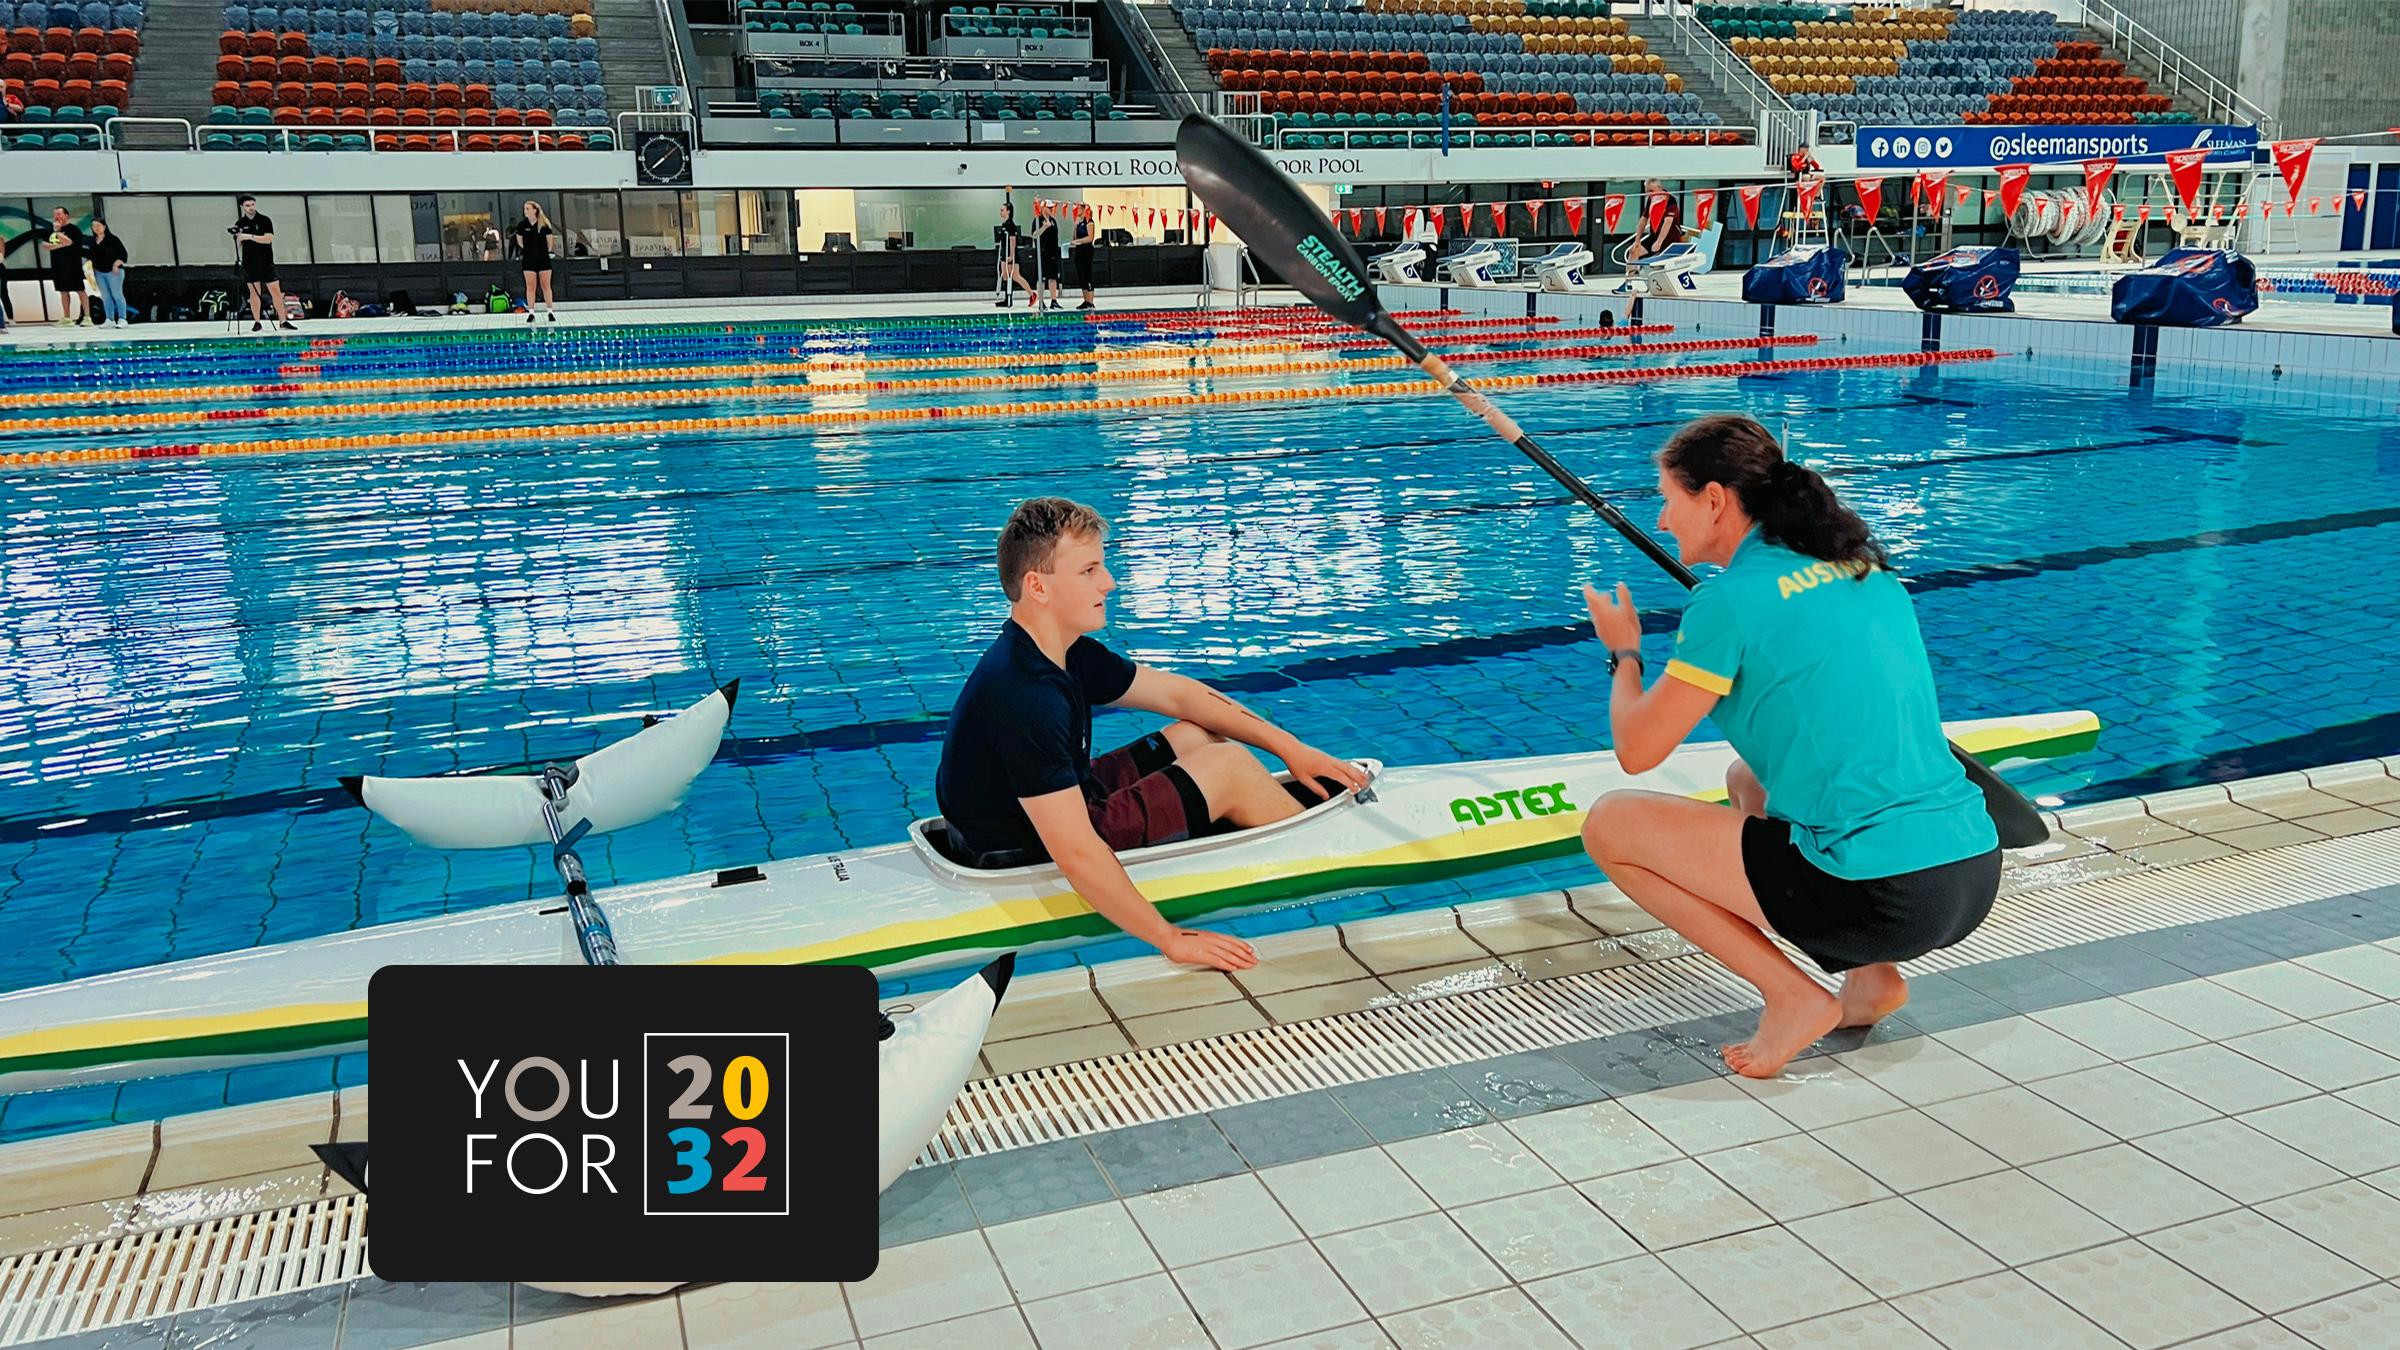 Young athlete in a kayak in an indoor pool speaking with his coach